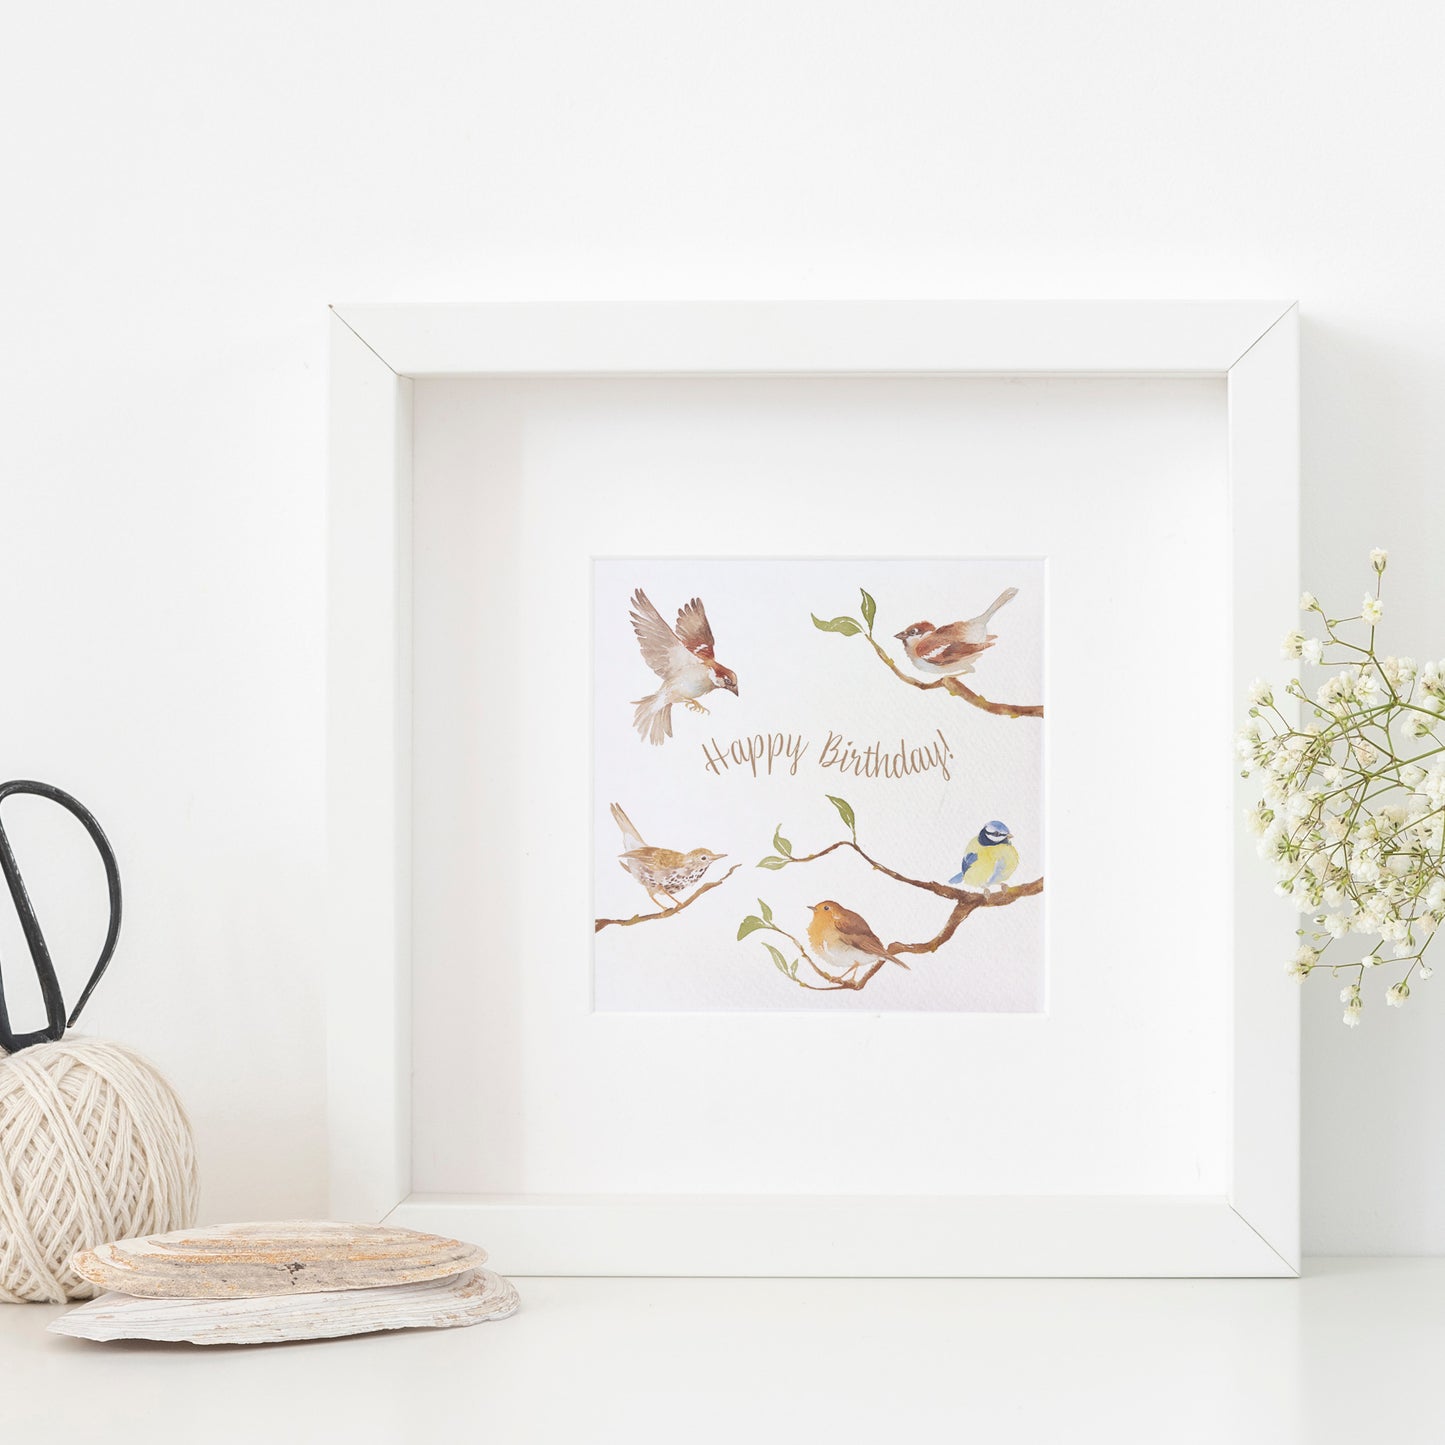 A greetings card displayed as an art print in a white frame propped up on a shelf next to a plant. The card reads Happy Birthday in brown text surrounded by garden birds on branches in a watercolour style.